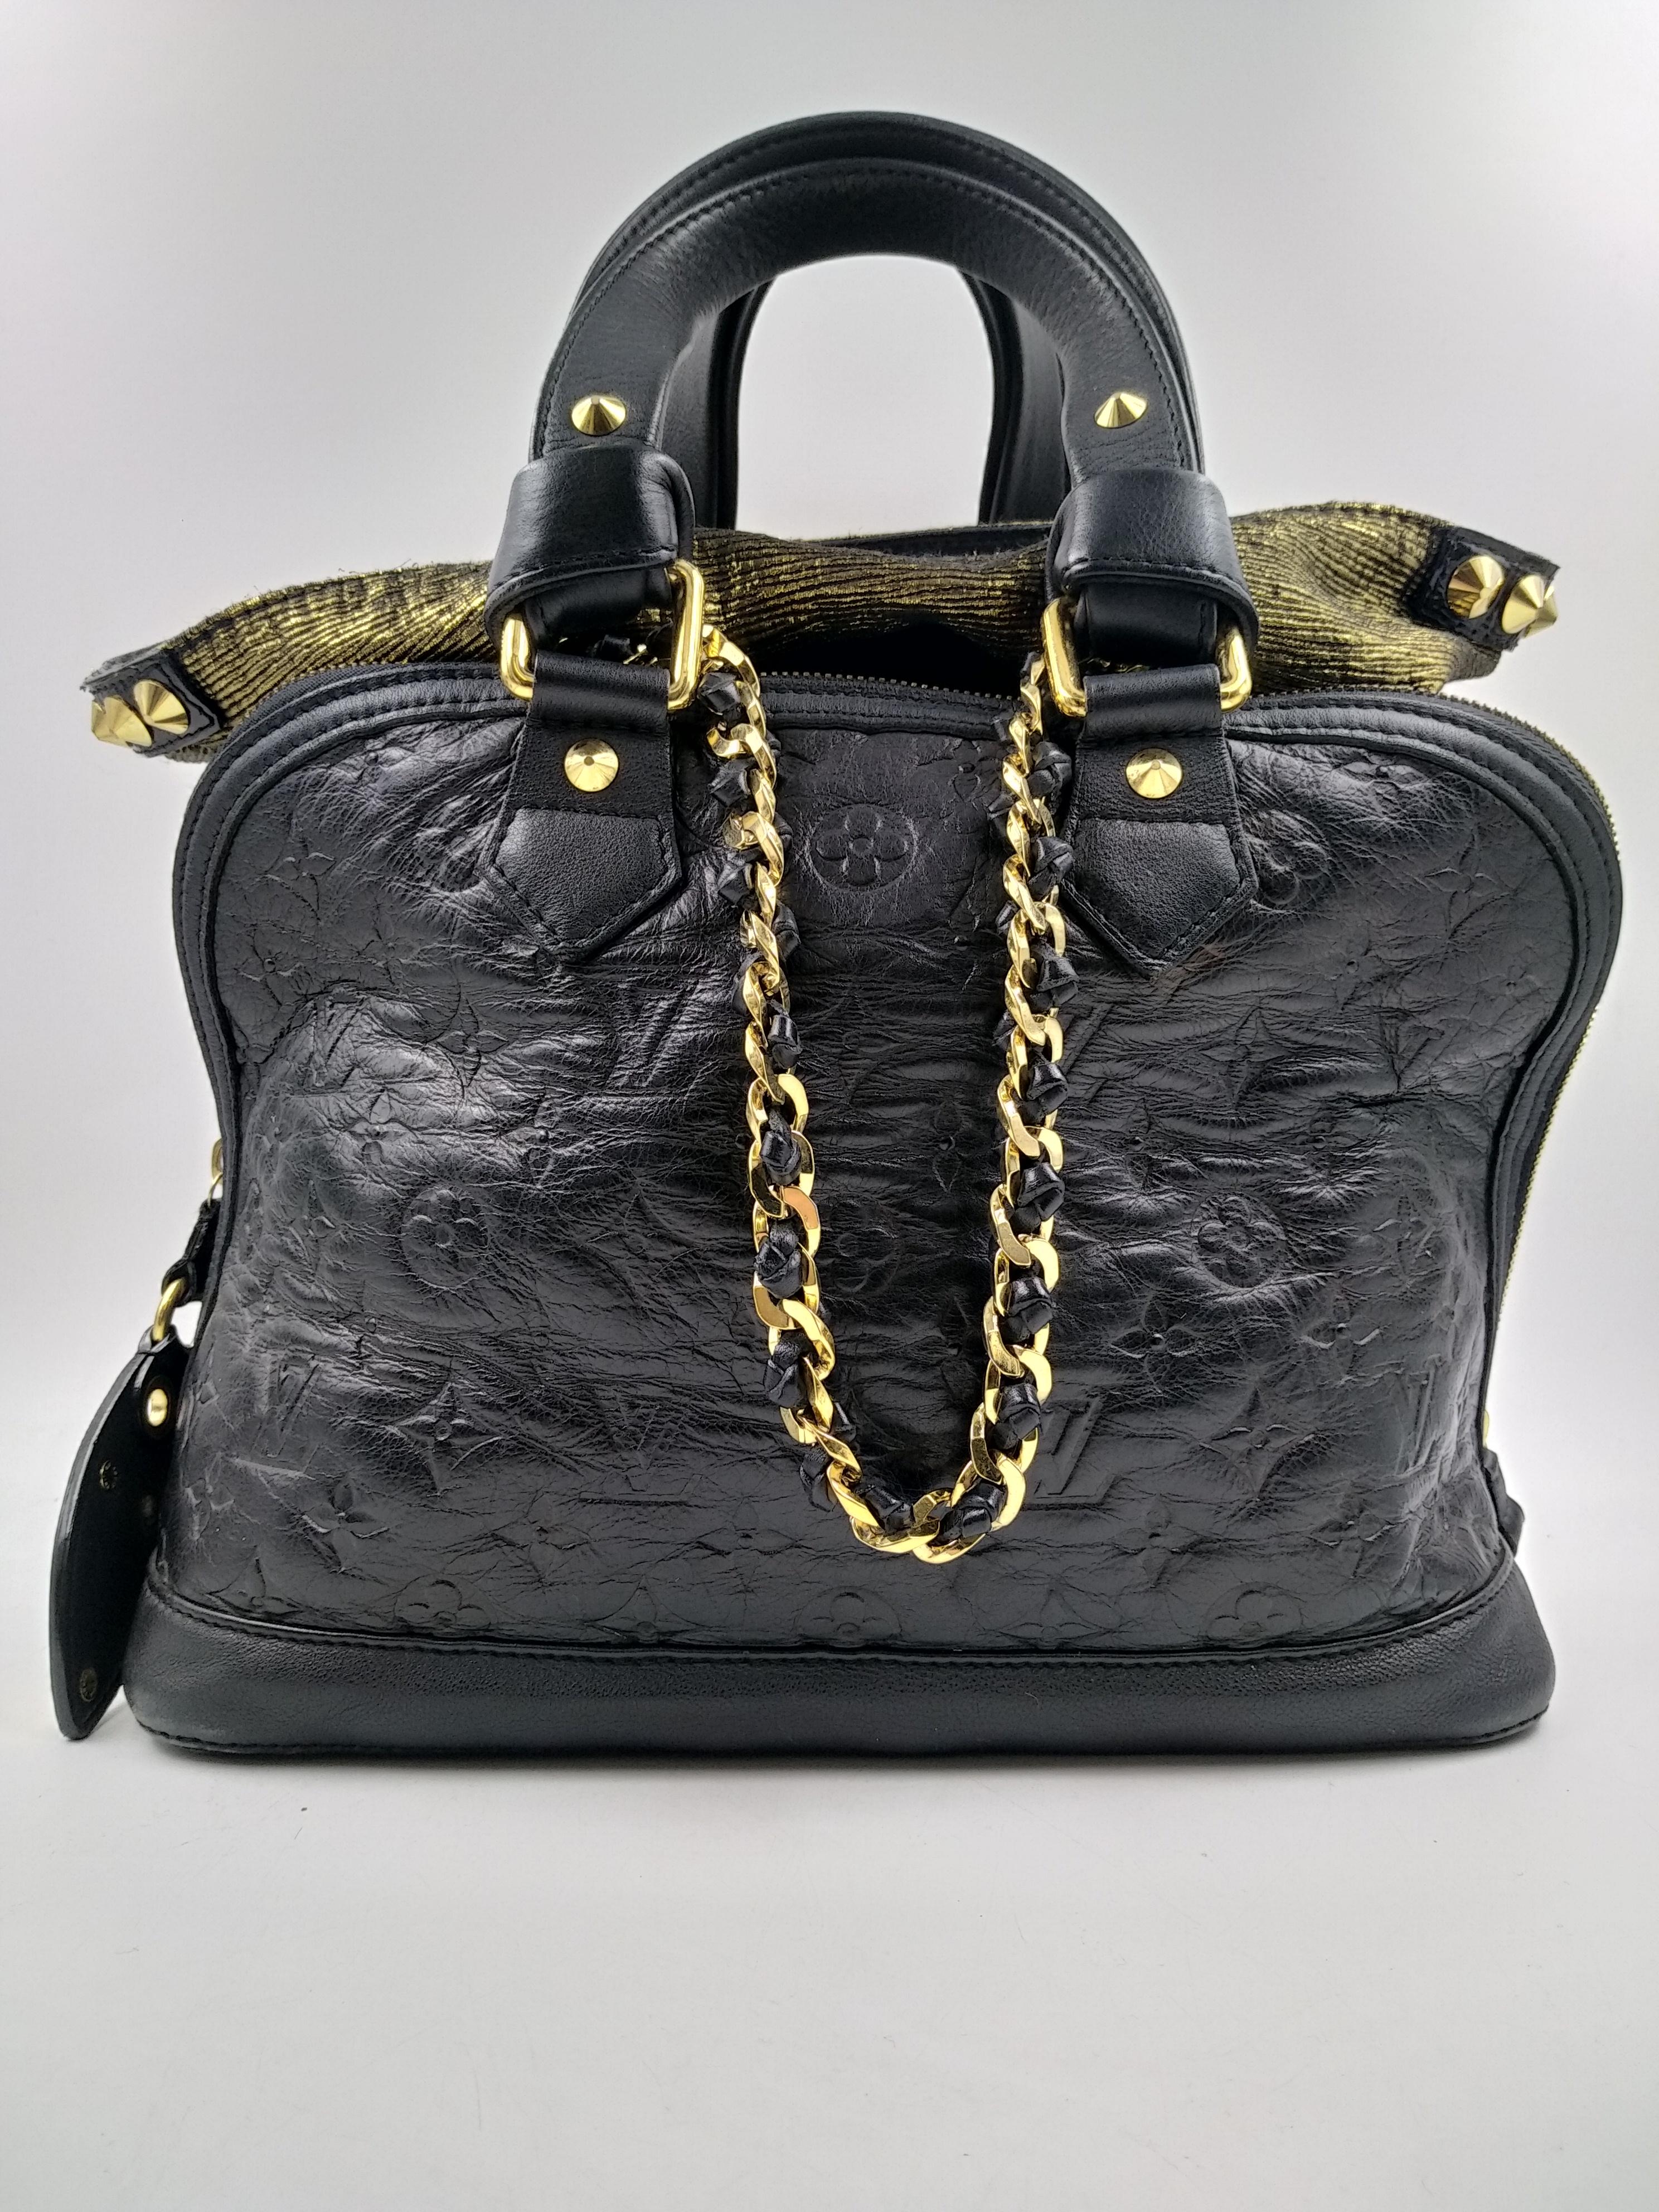 Louis Vuitton Black Monogram Double Jeu Neo-Alma Bag, Limited Edition 2009/2010
- 100% authentic Louis Vuitton
- Inside the Monogram embossed leather Alma, there is completely separate bag made of jacquard textile with metallic threads that can be